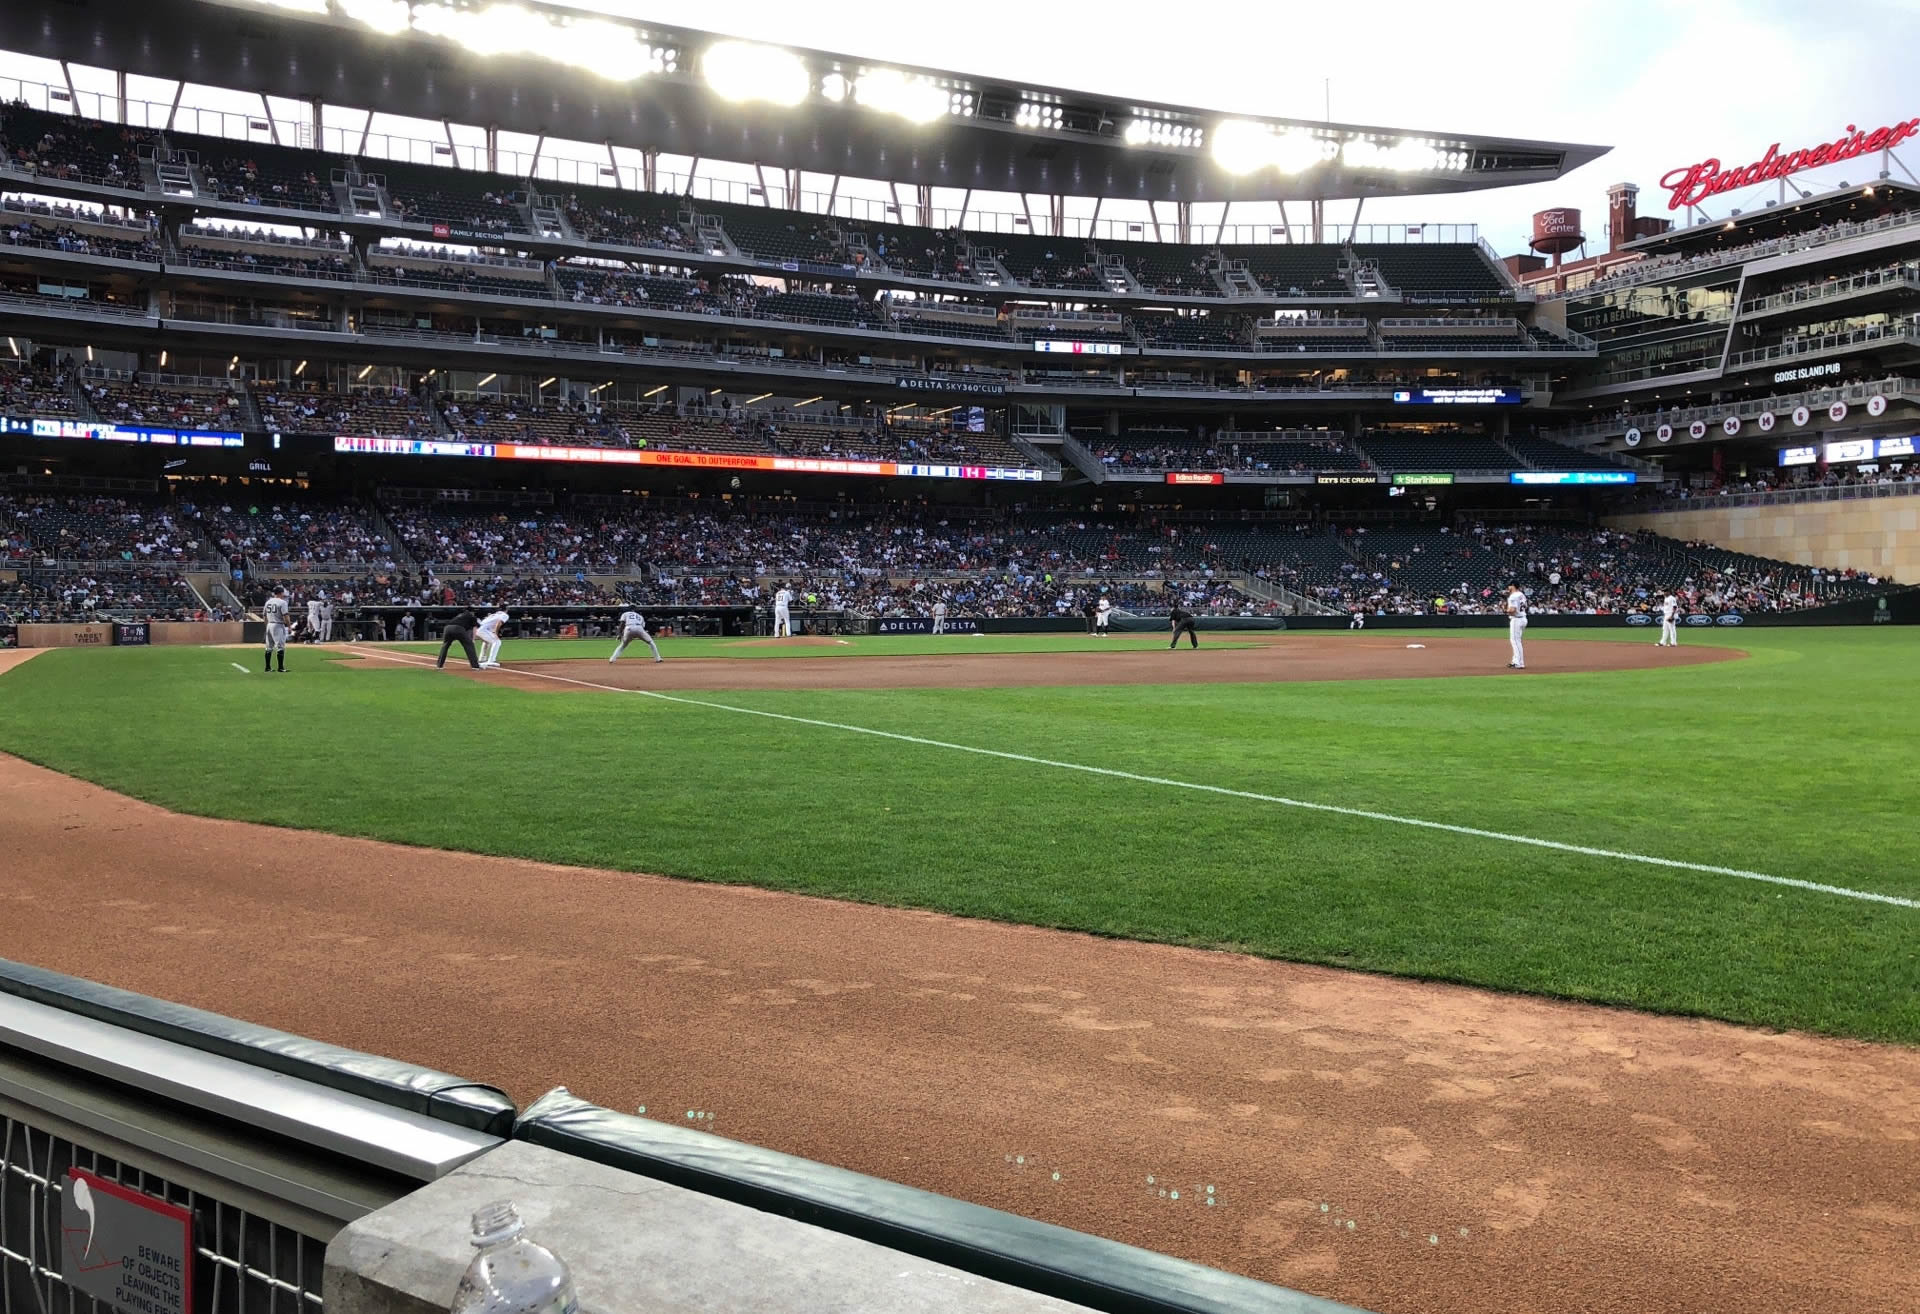 section 103, row 1 seat view  - target field